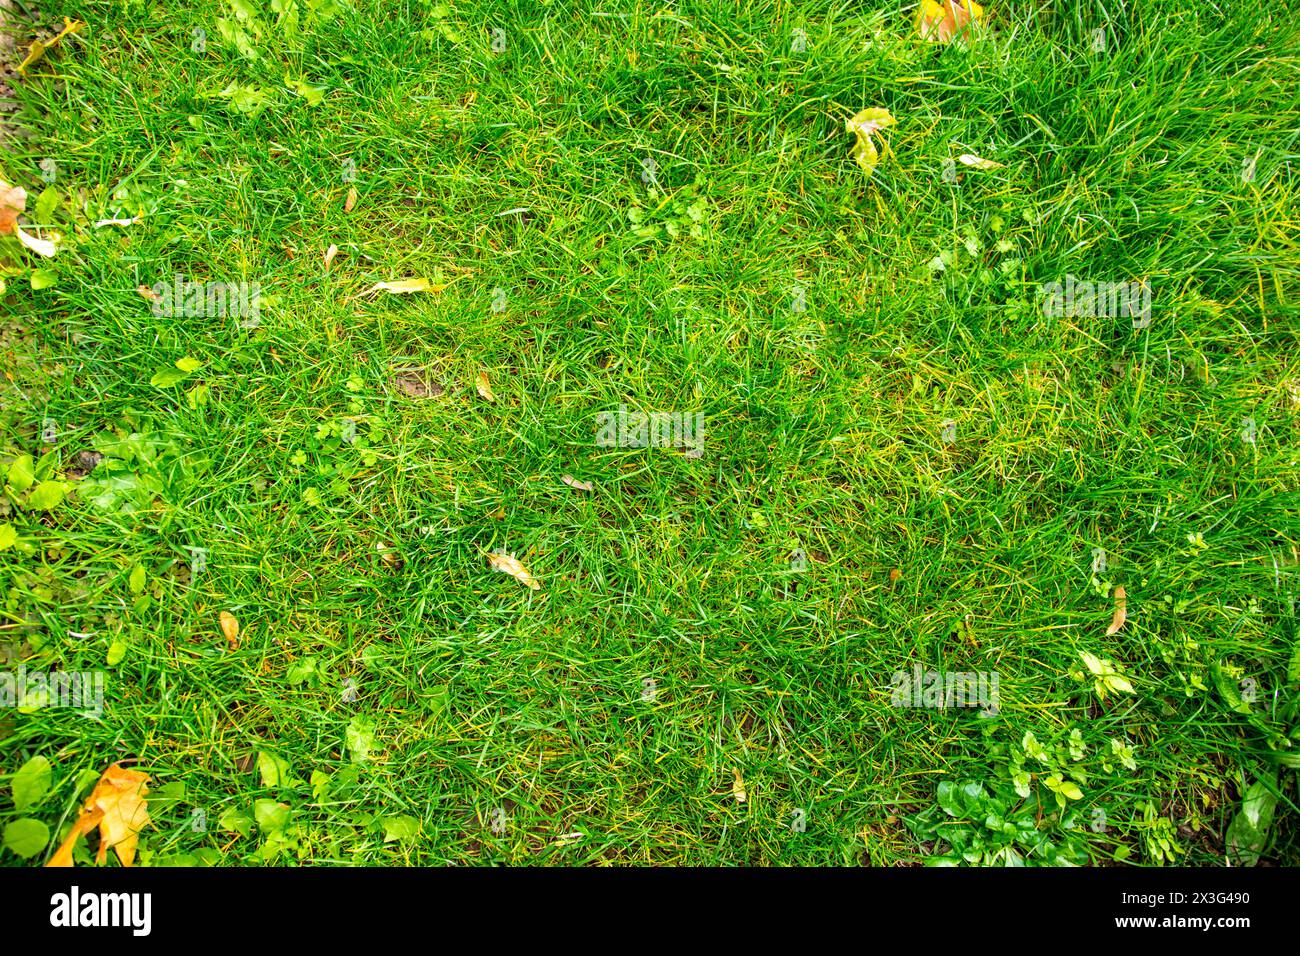 Green natural texture background. View of bright grass in the summer garden. Stock Photo